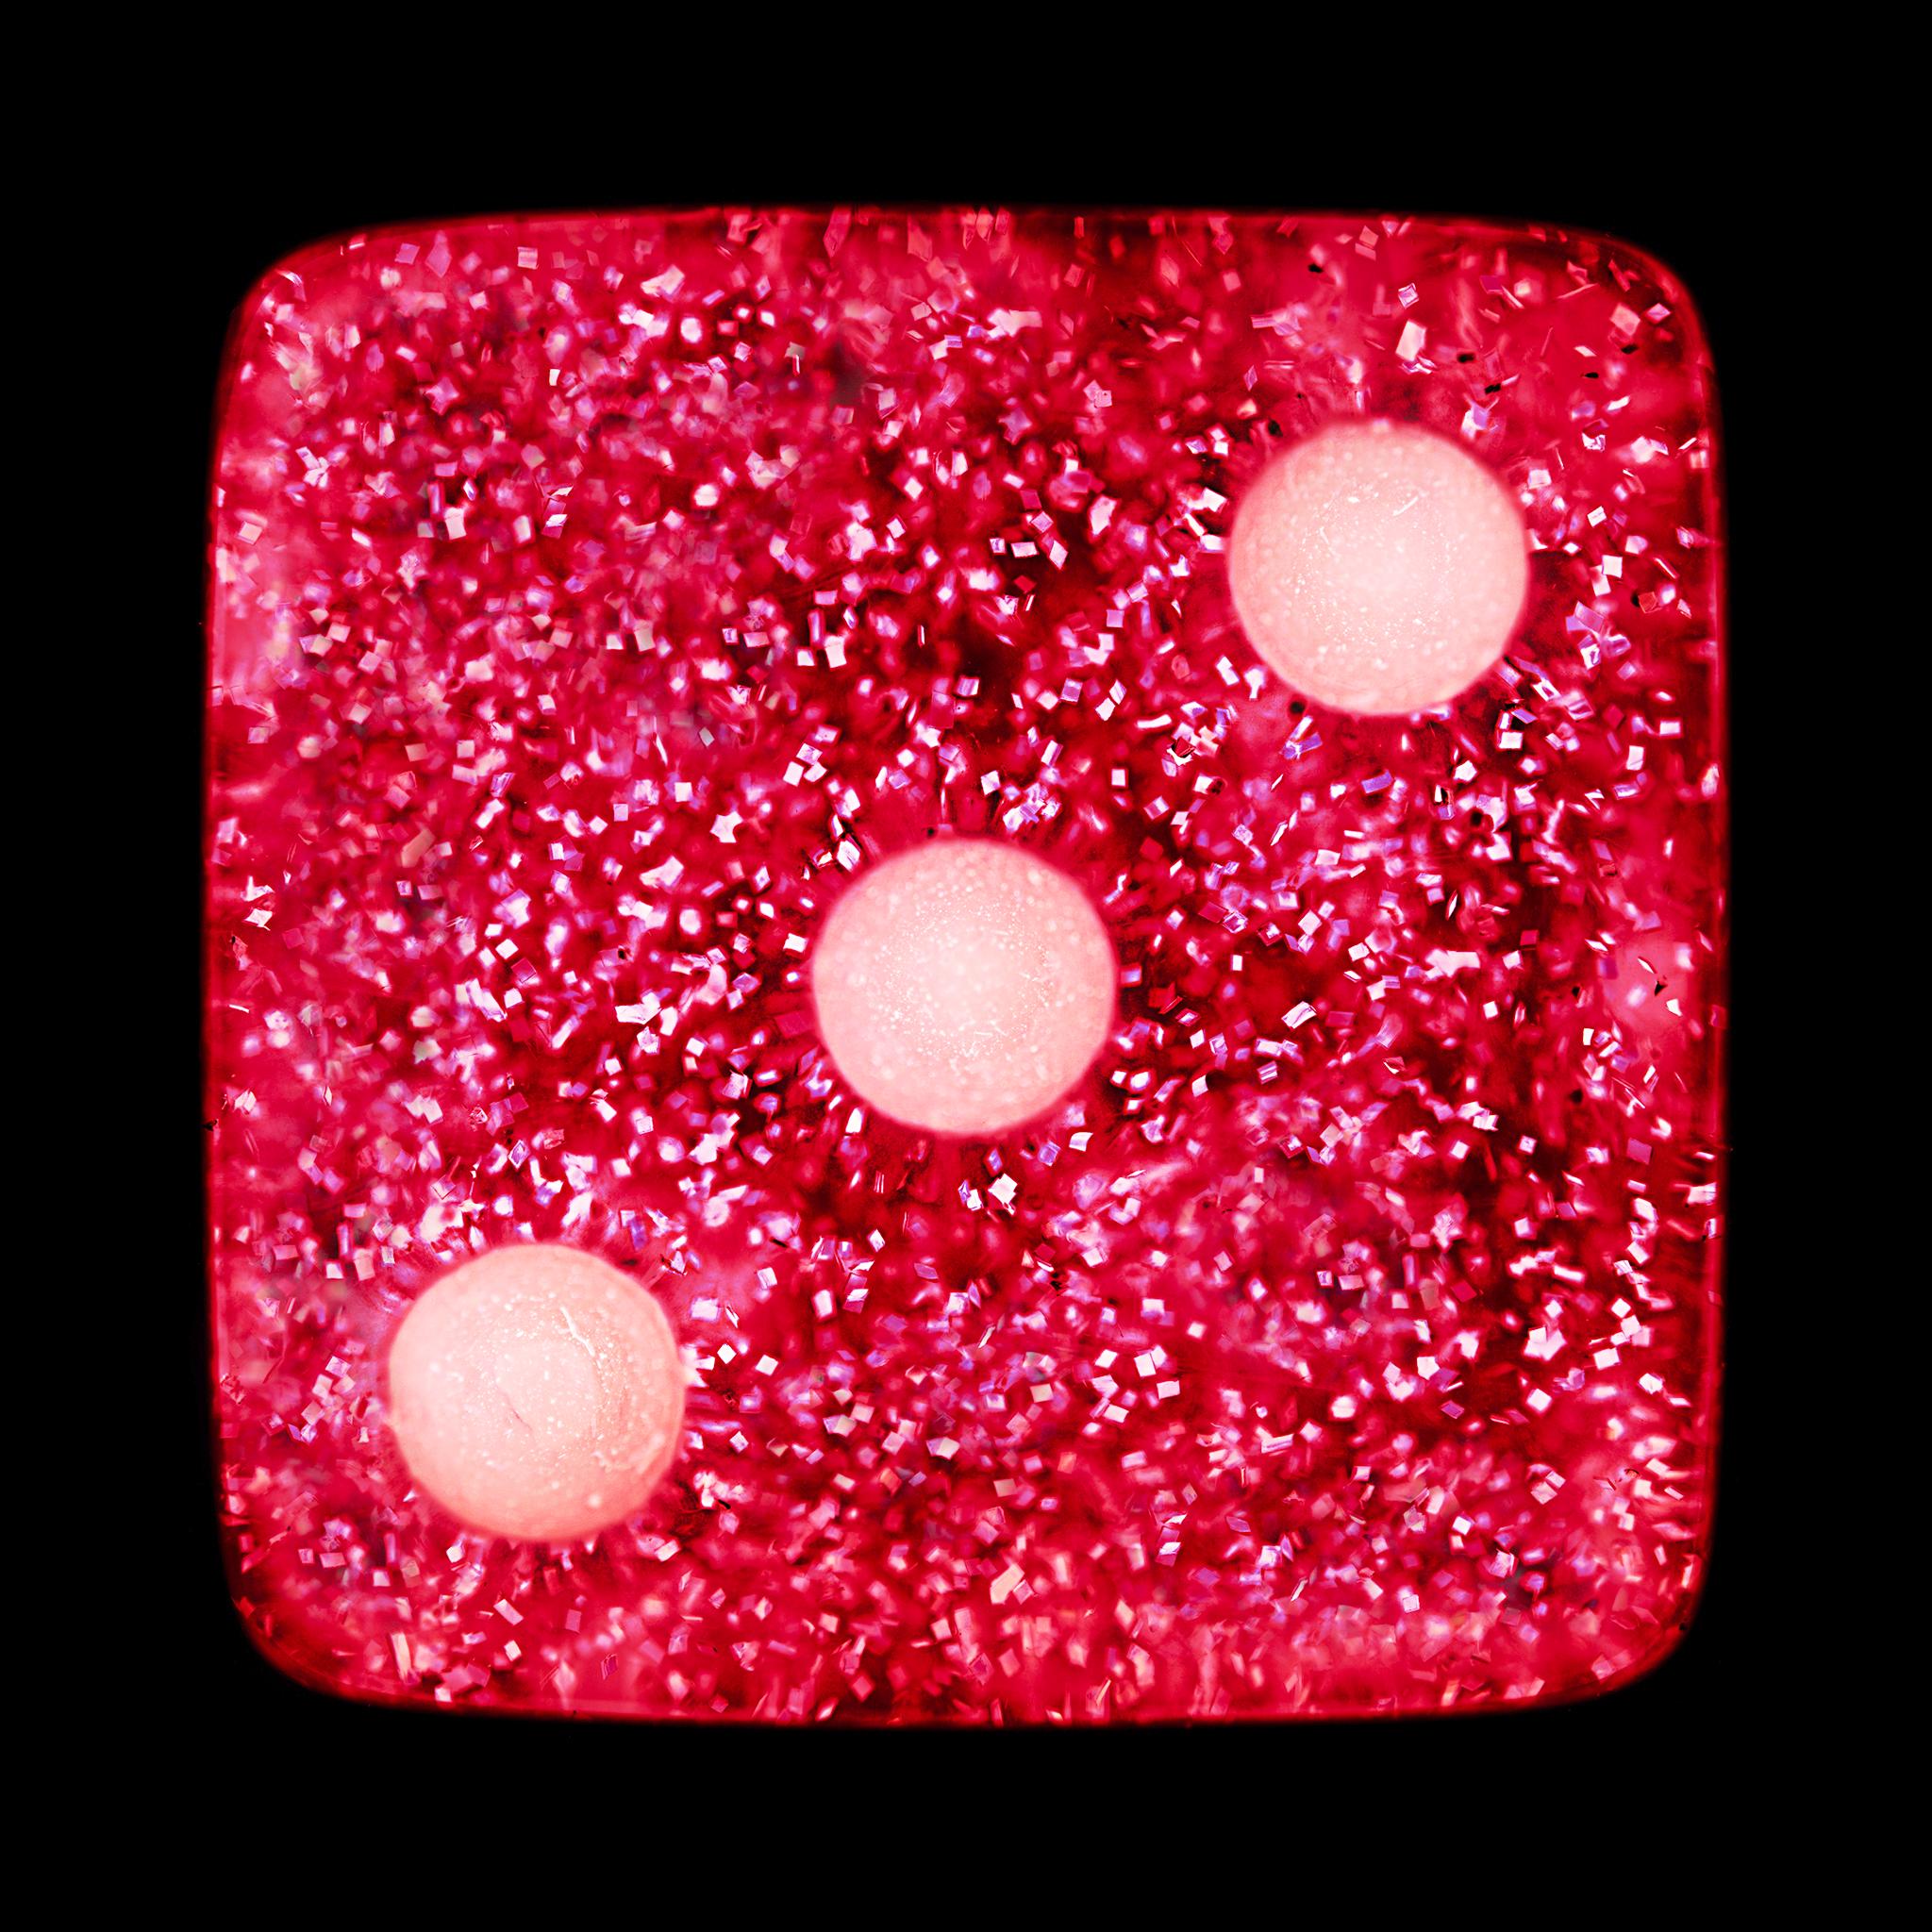 Heidler & Heeps Dice Series - Three Dice Raspberry Sparkles.

Hypnotically curious in both content and technique, viewers find themselves pleasantly puzzled. Heidler & Heeps have developed their own dichromatic technique resulting in something,